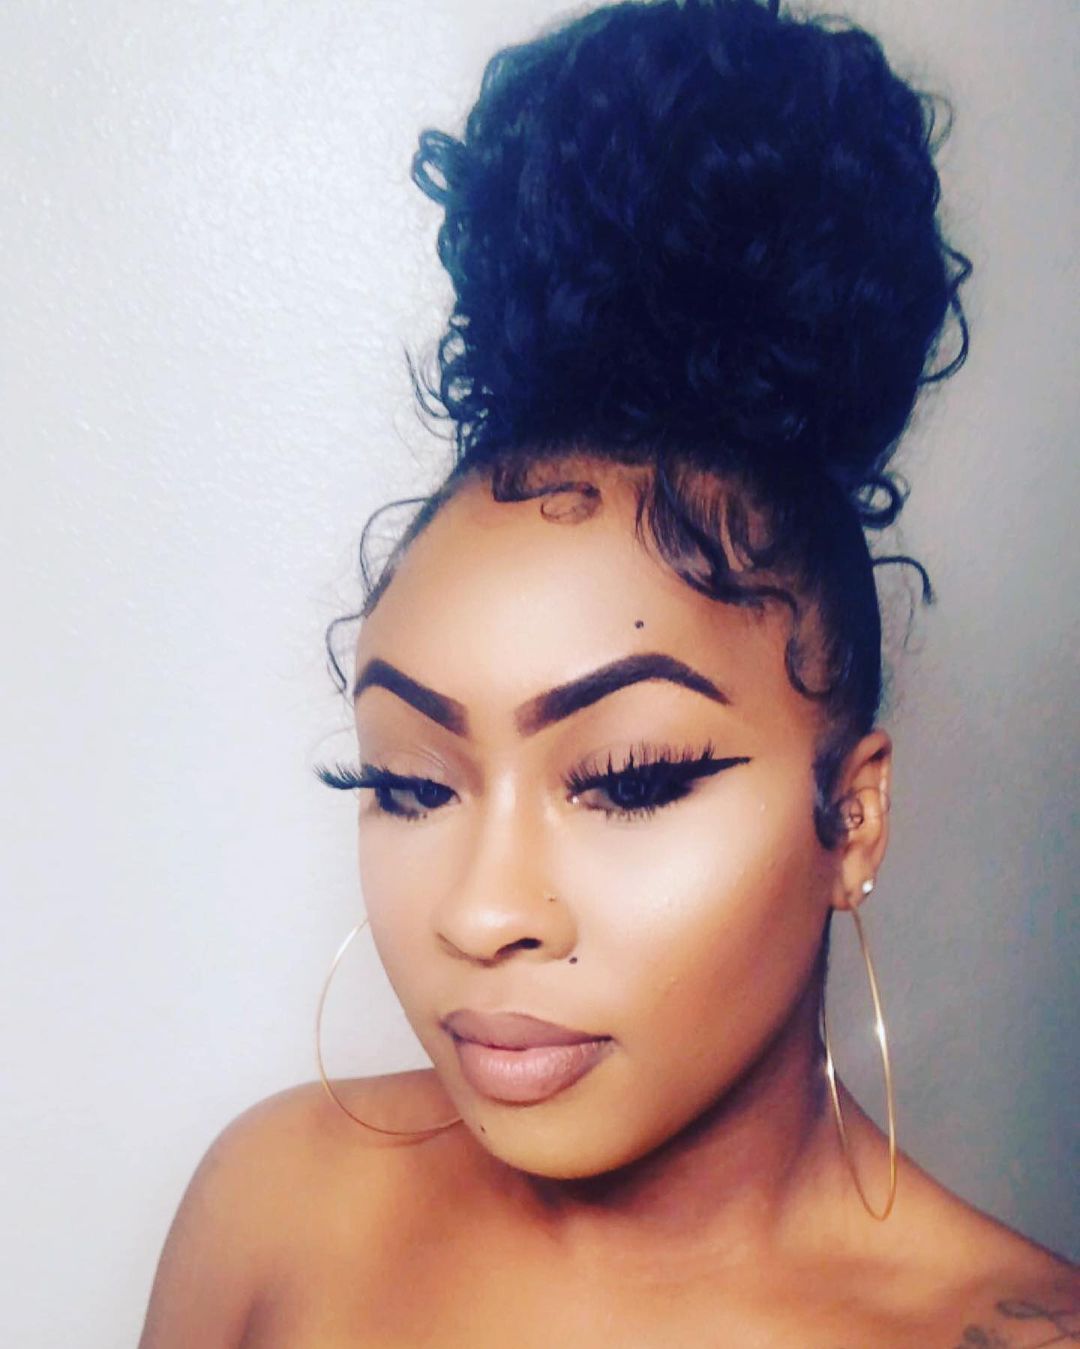 Updo Hairstyle for Black women 41 Black hair updo styles pictures | Black updo hairstyles with curls | black woman braids Updo Hairstyles for Black Women